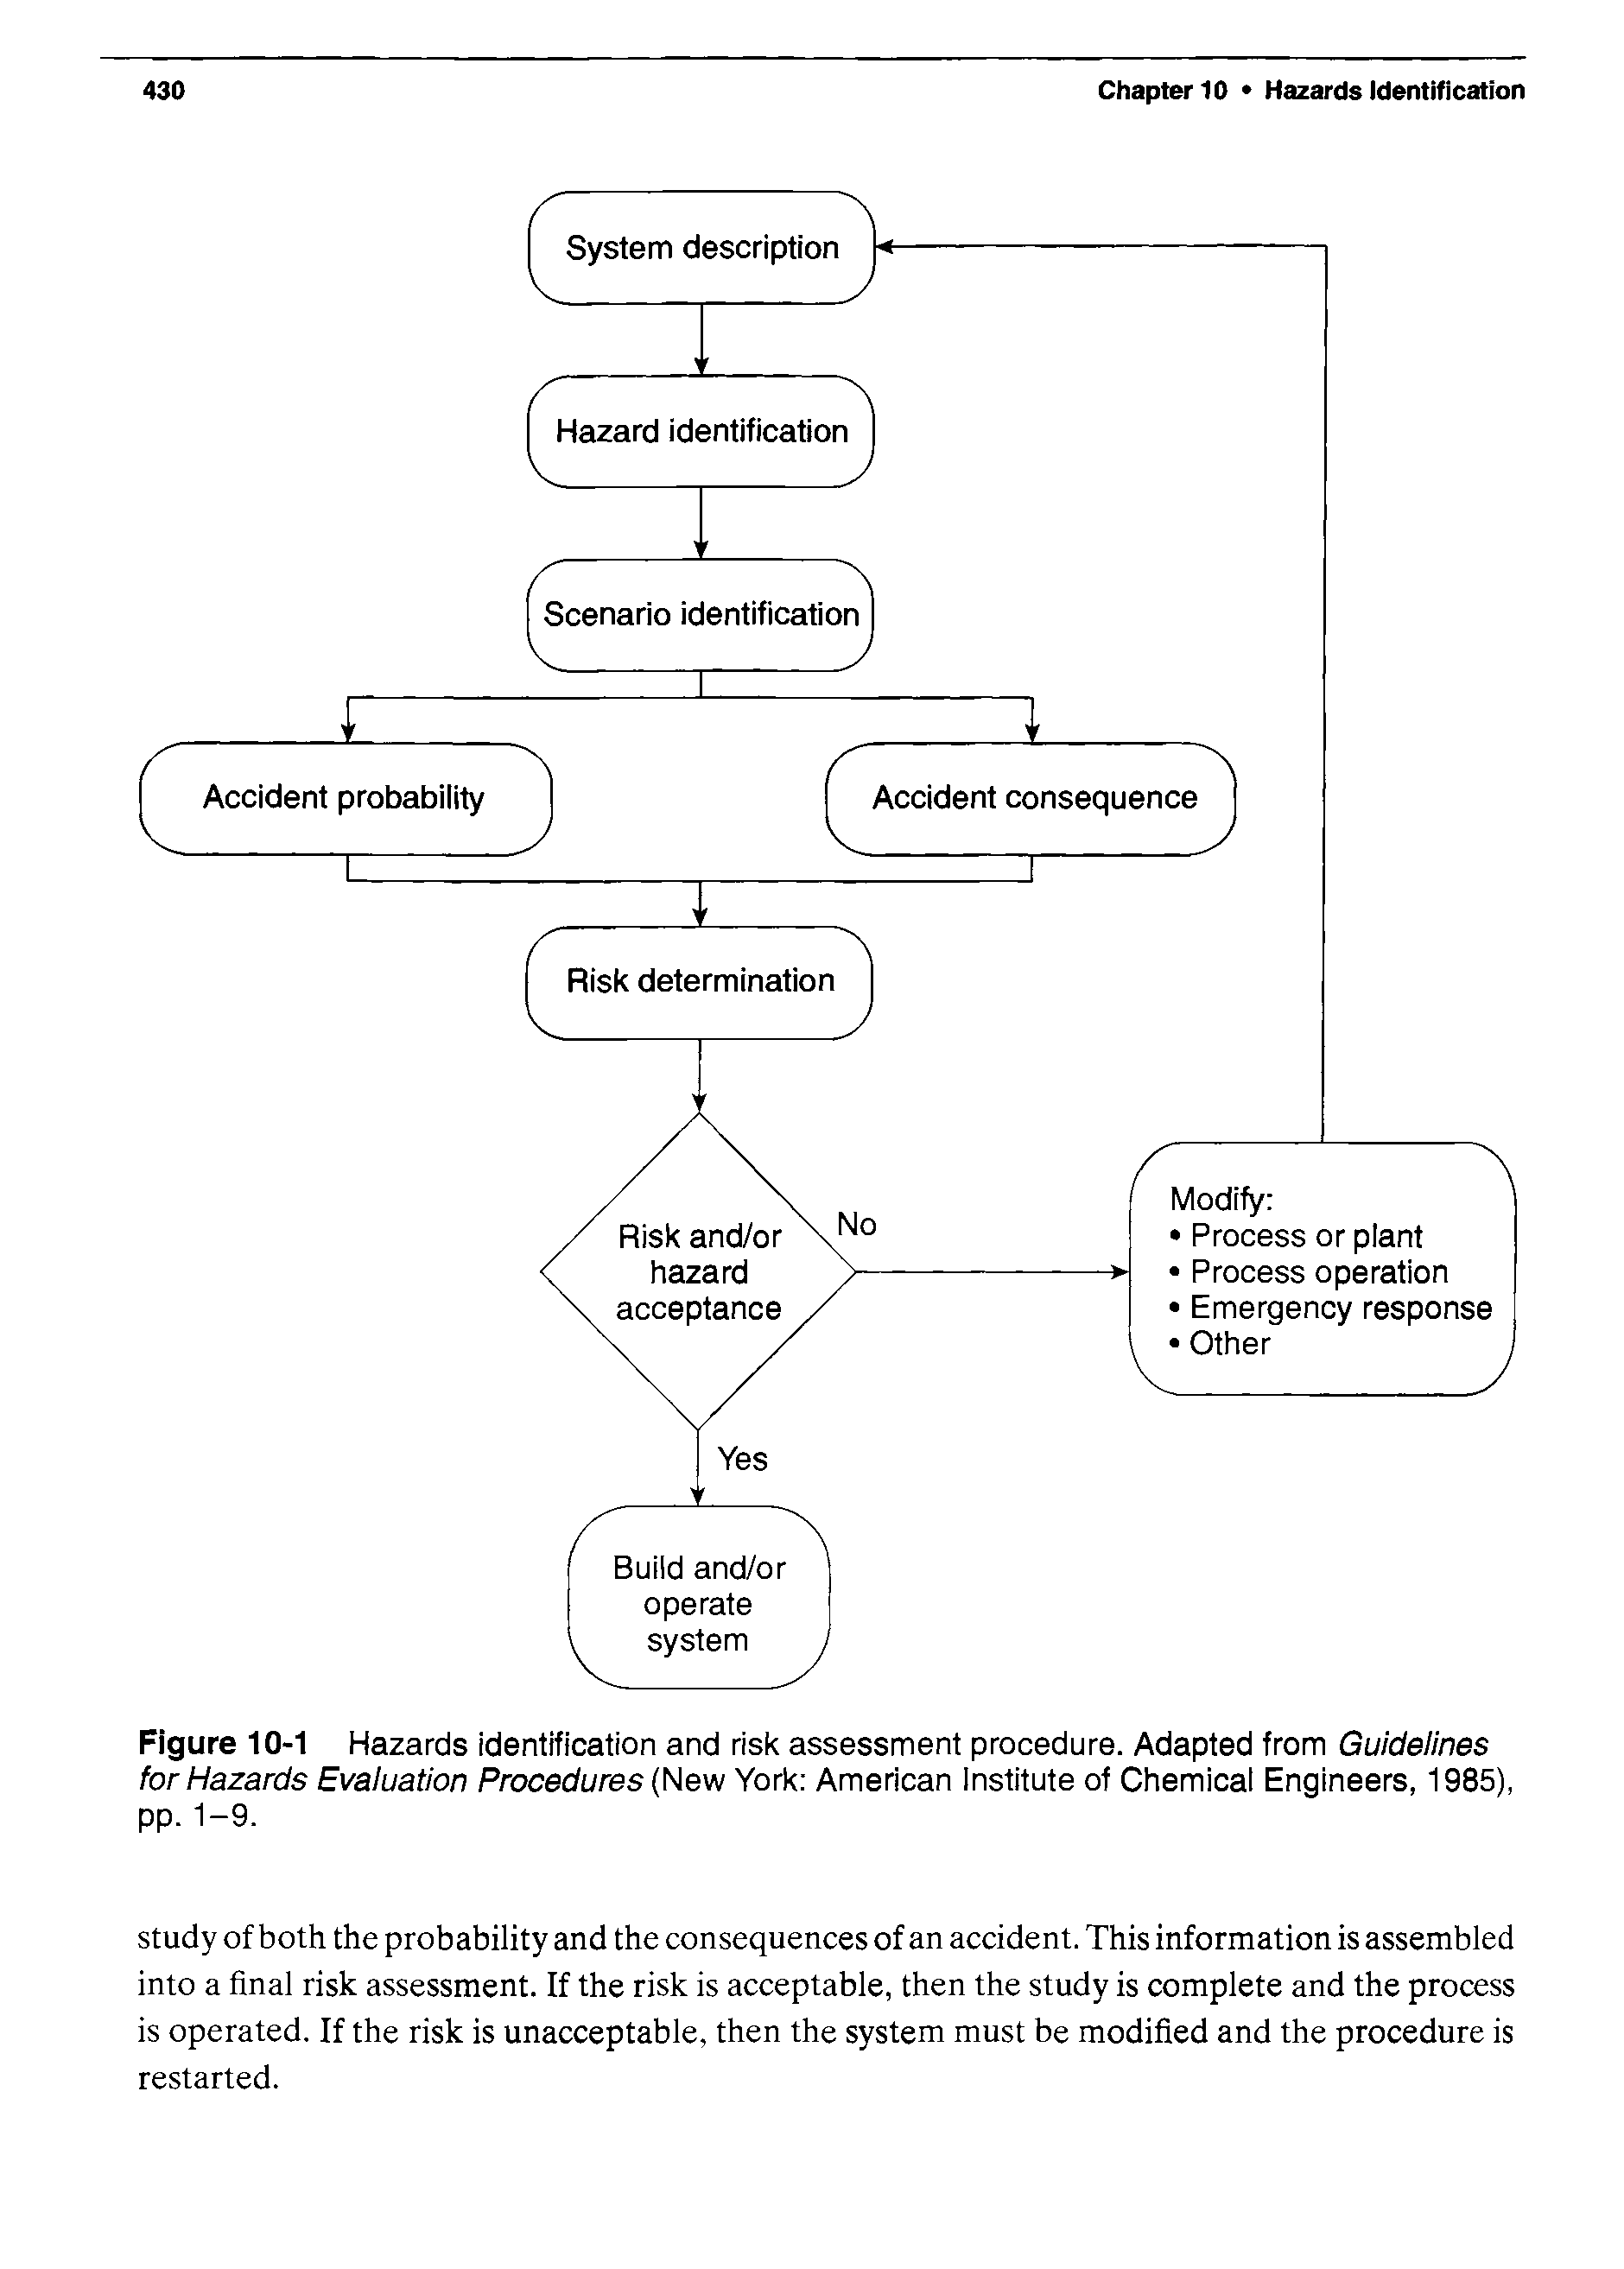 Figure 10-1 Hazards identification and risk assessment procedure. Adapted from Guidelines for Hazards Evaluation Procedures (New York American Institute of Chemical Engineers, 1985), pp. 1-9.